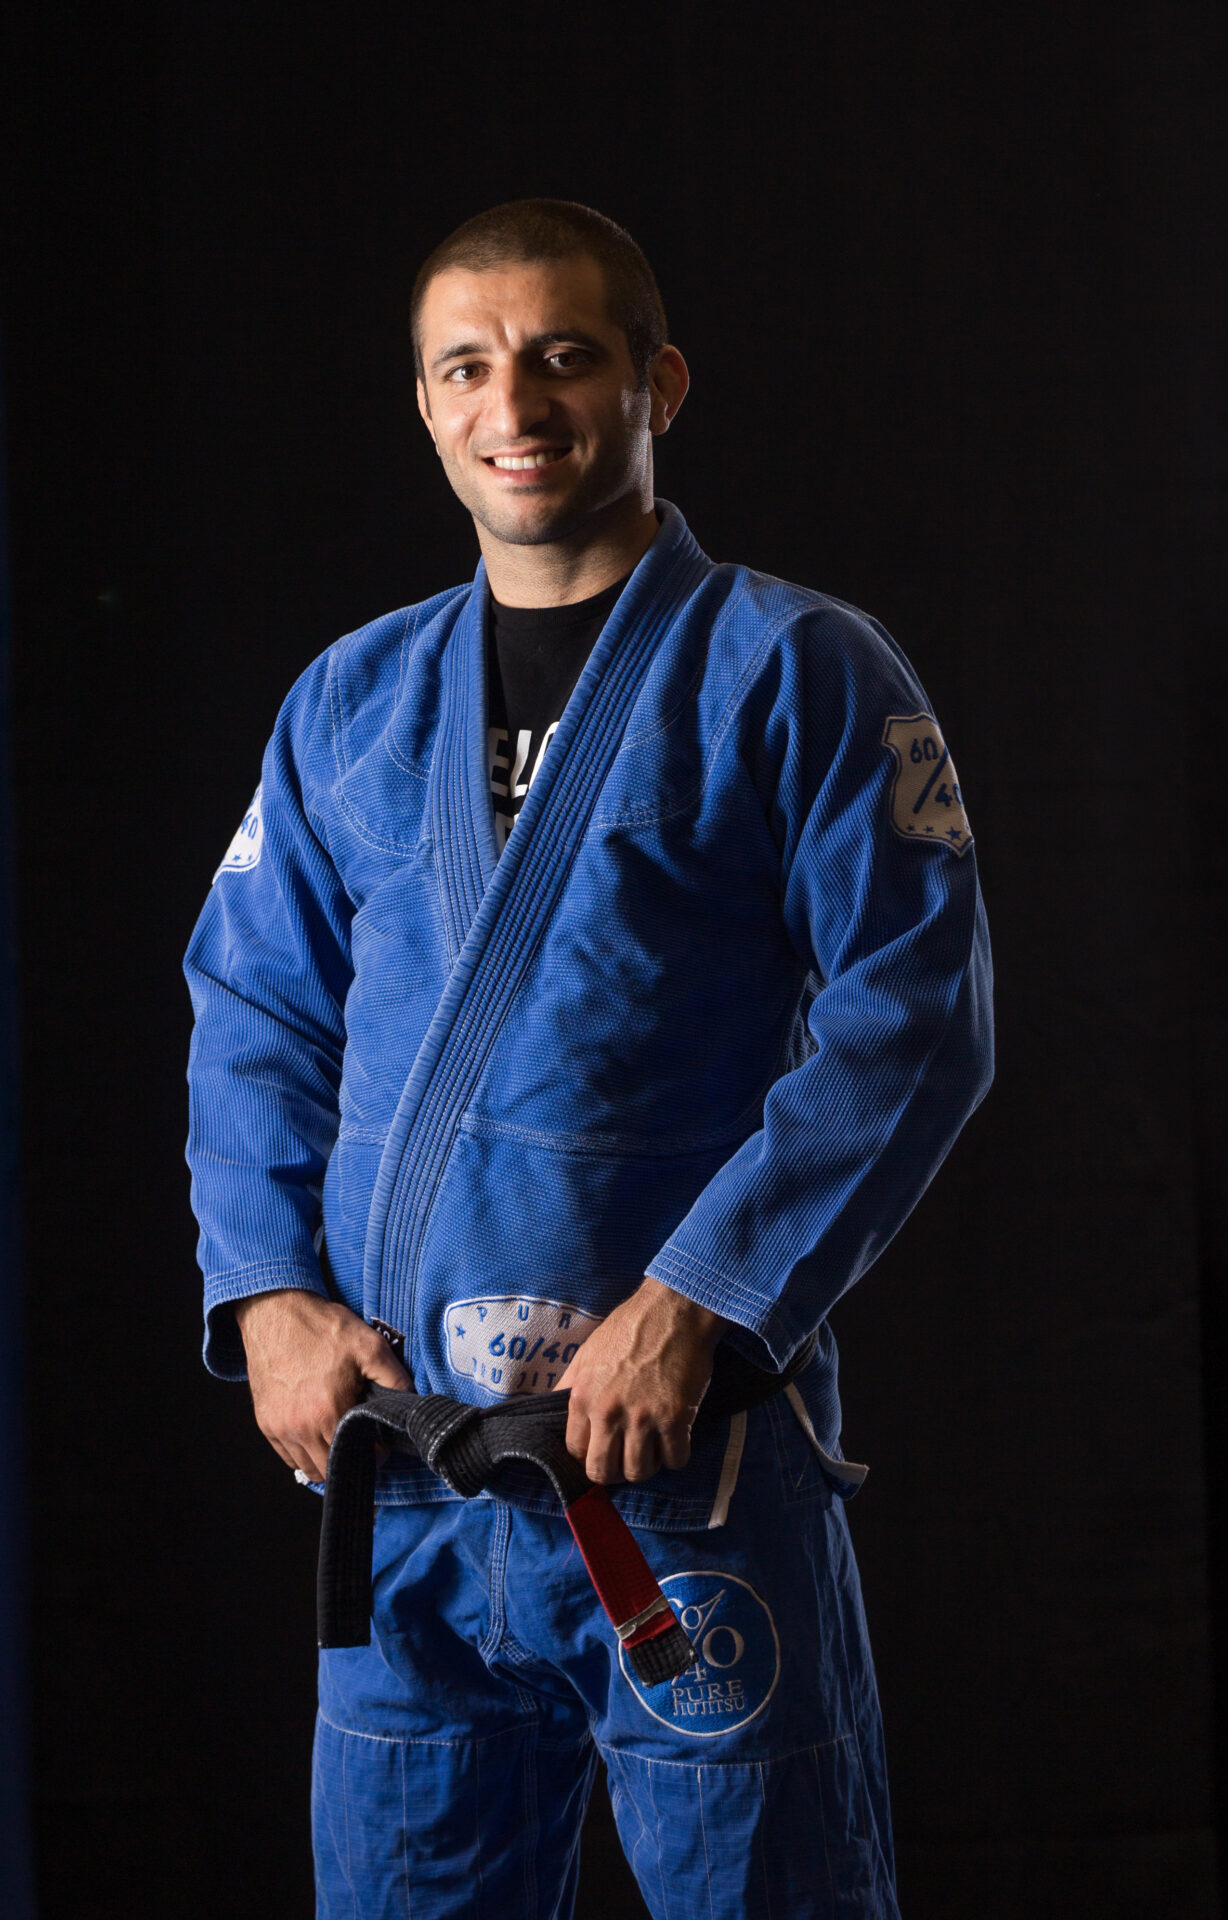 A man in blue and black uniform holding a red belt.